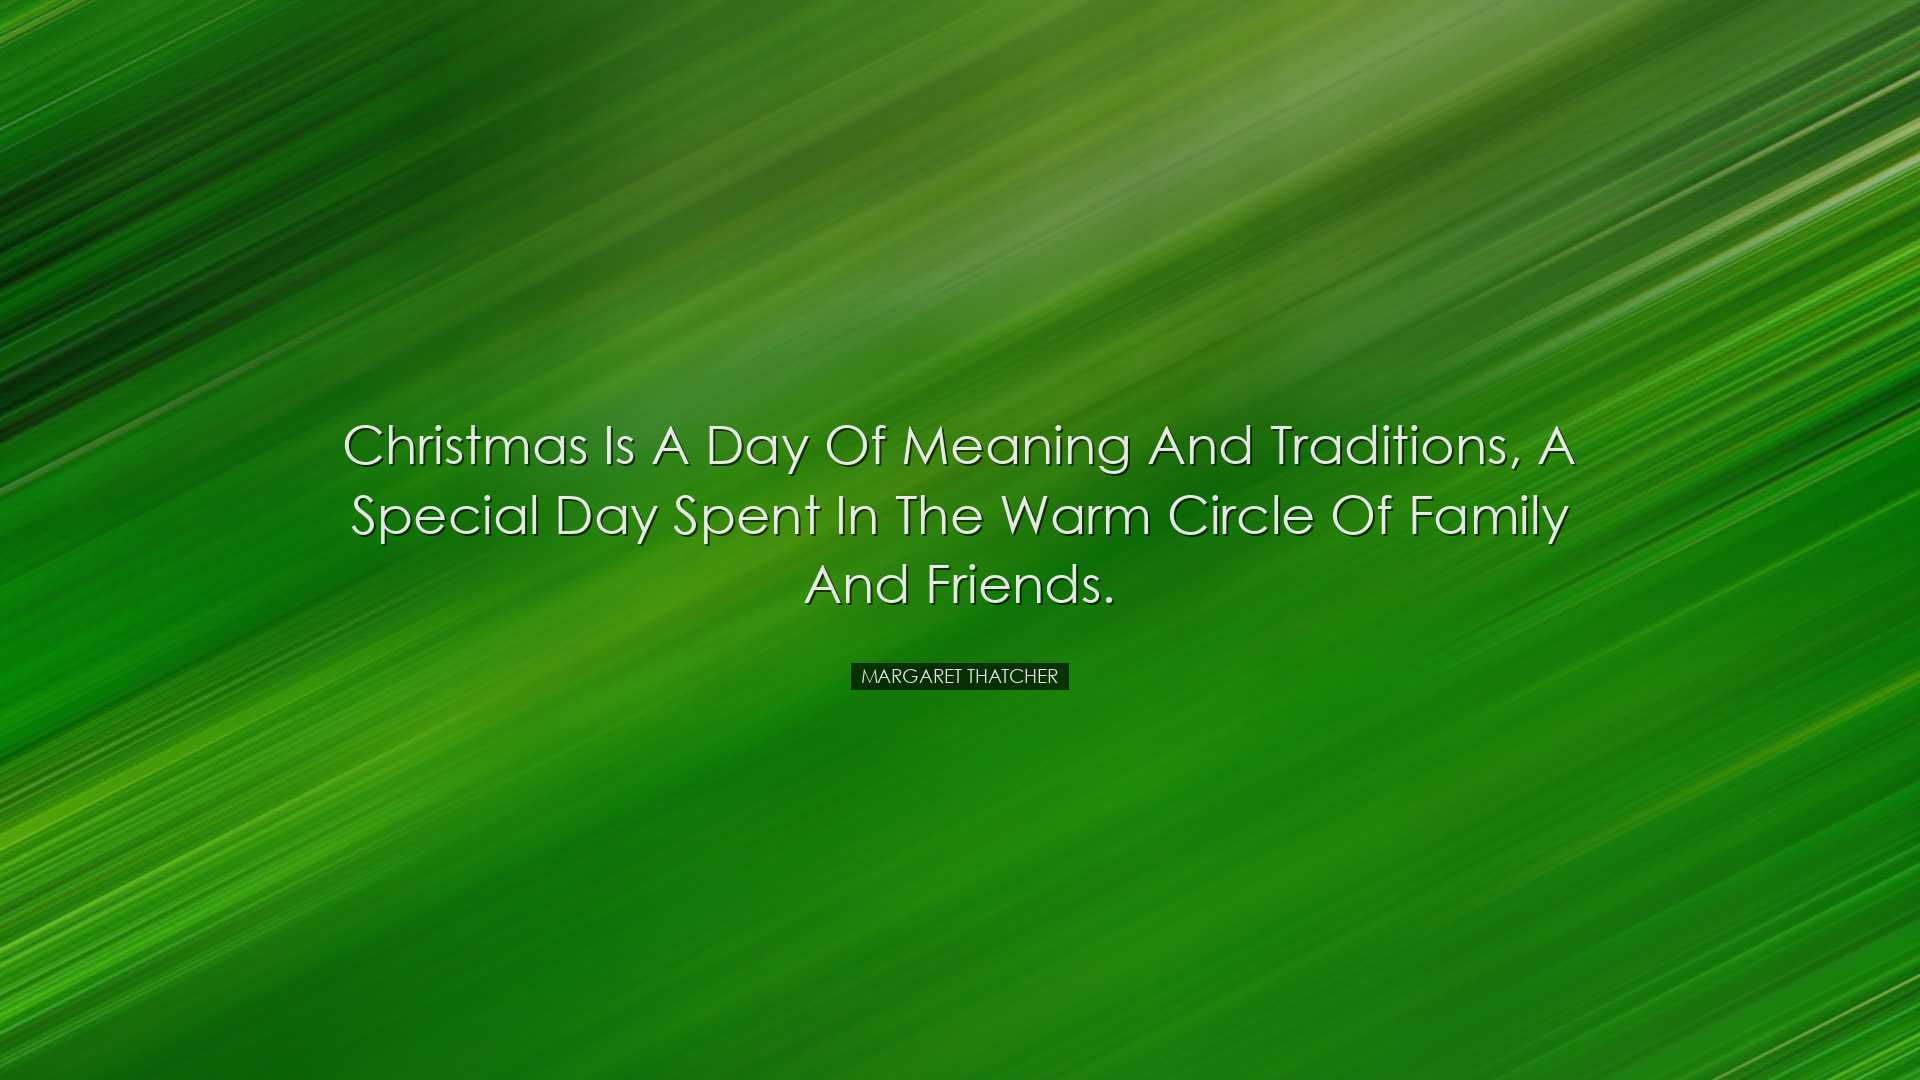 Christmas is a day of meaning and traditions, a special day spent